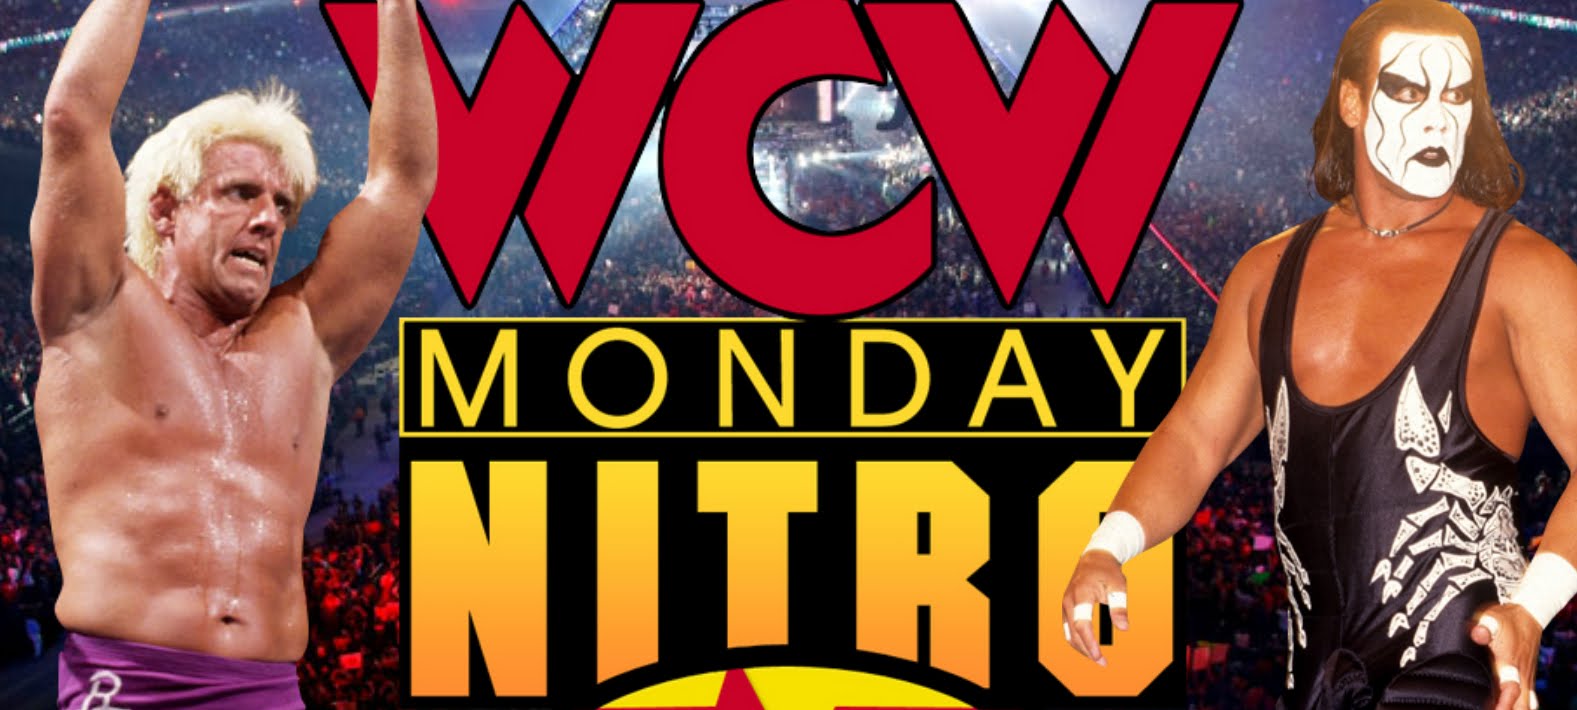 Images of Wcw | 1577x710